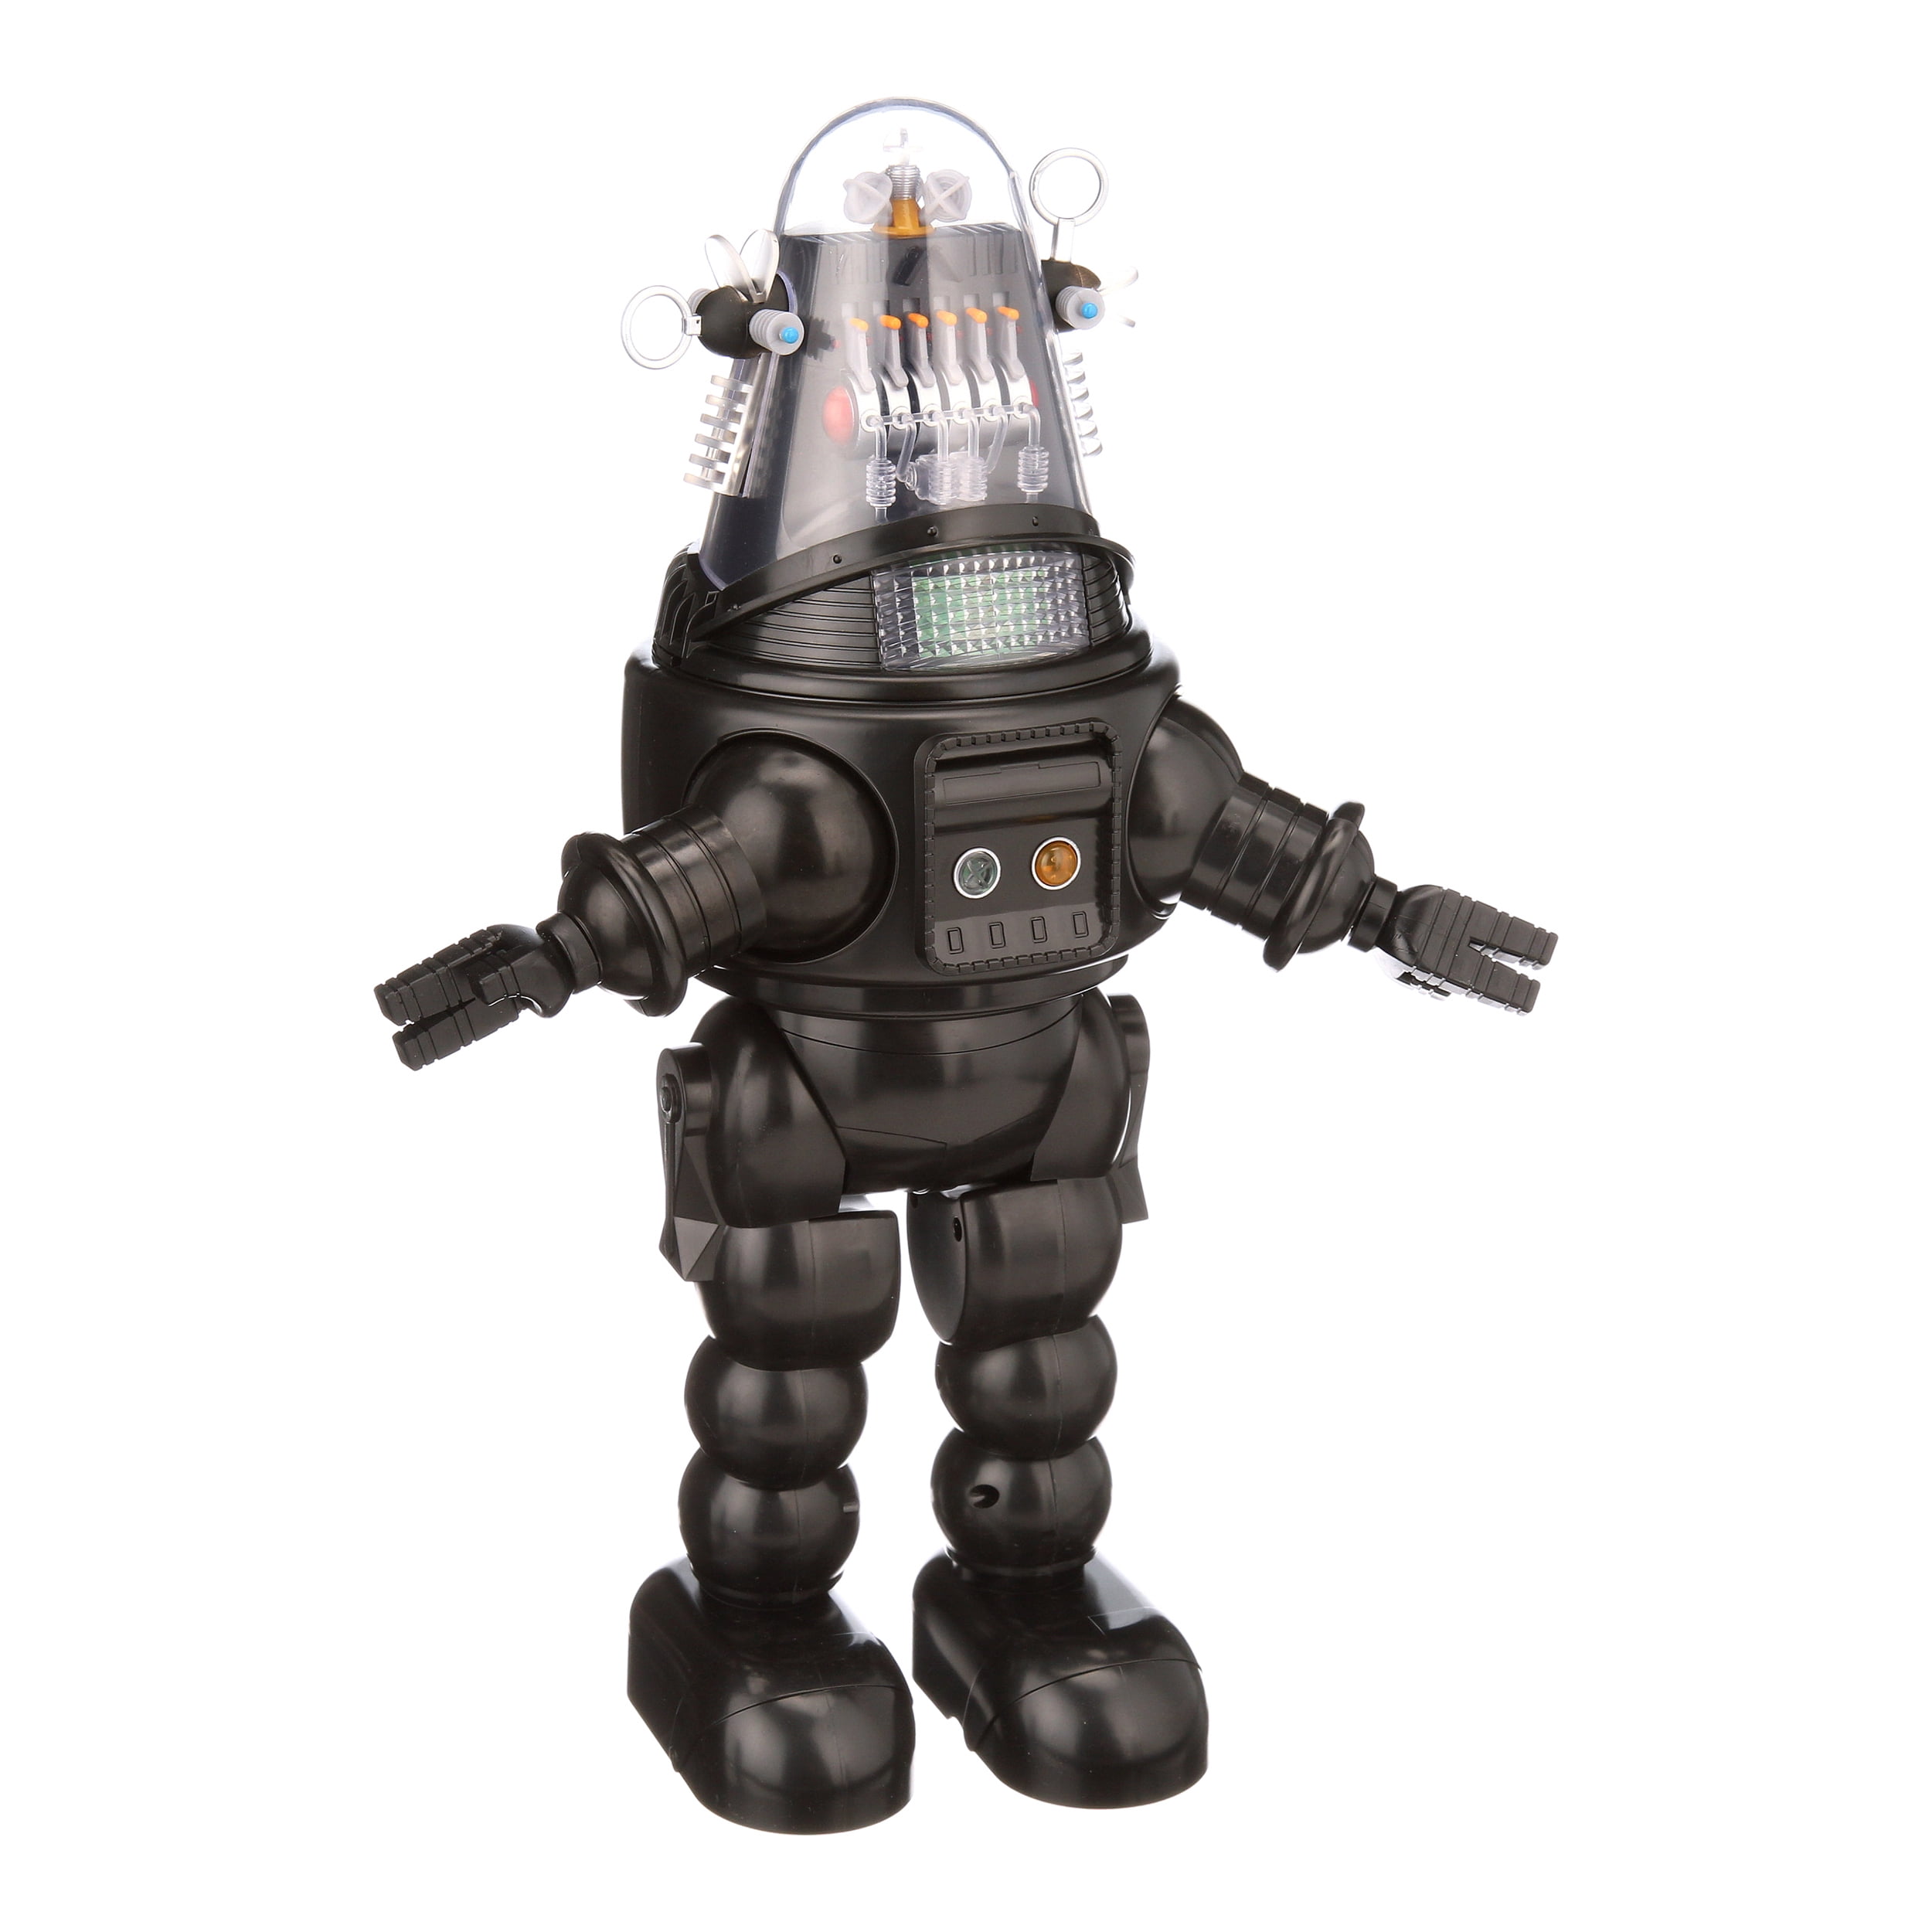 Light & Sound Walking Toy Details about   15" Forbidden Planet Robby The Robot Action Figure 